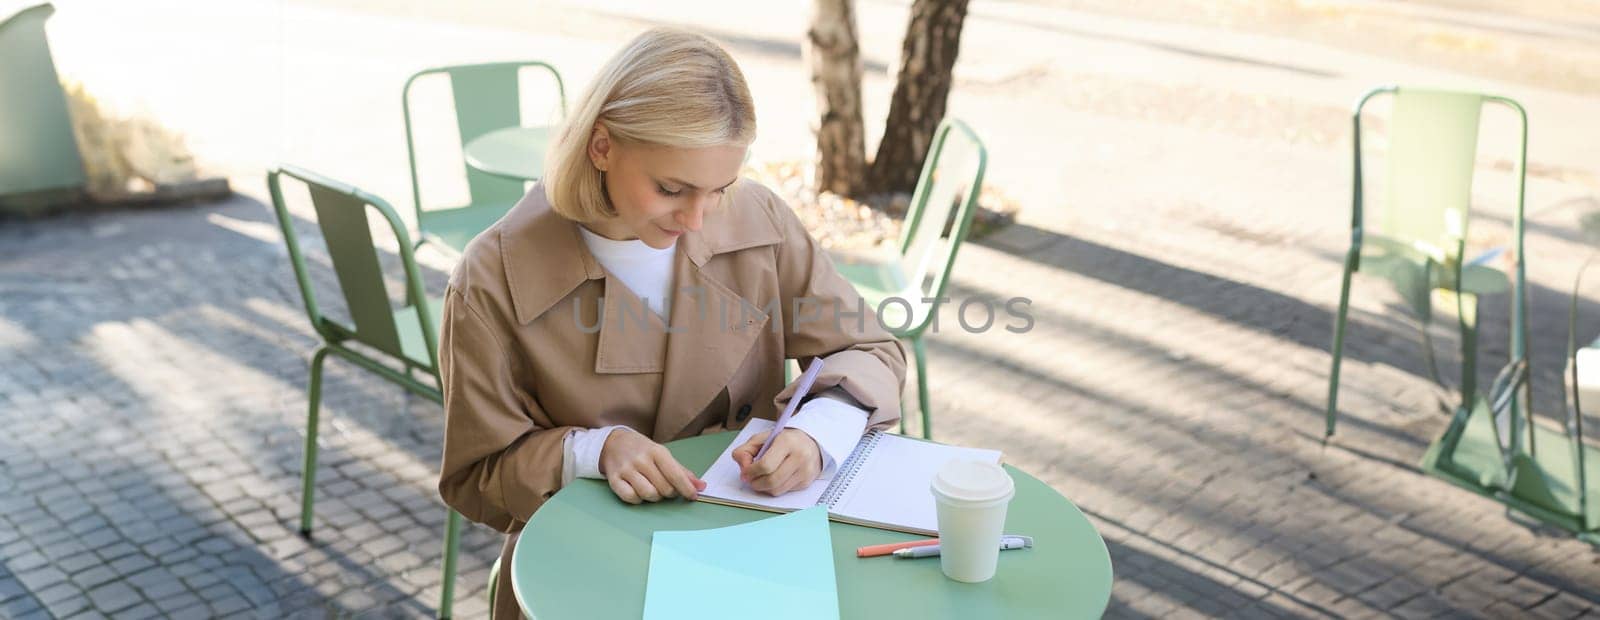 Portrait of woman working on project, writing in notebook, sitting outdoors in cafe, drinking coffee and doing homework. Student lifestyle and people concept